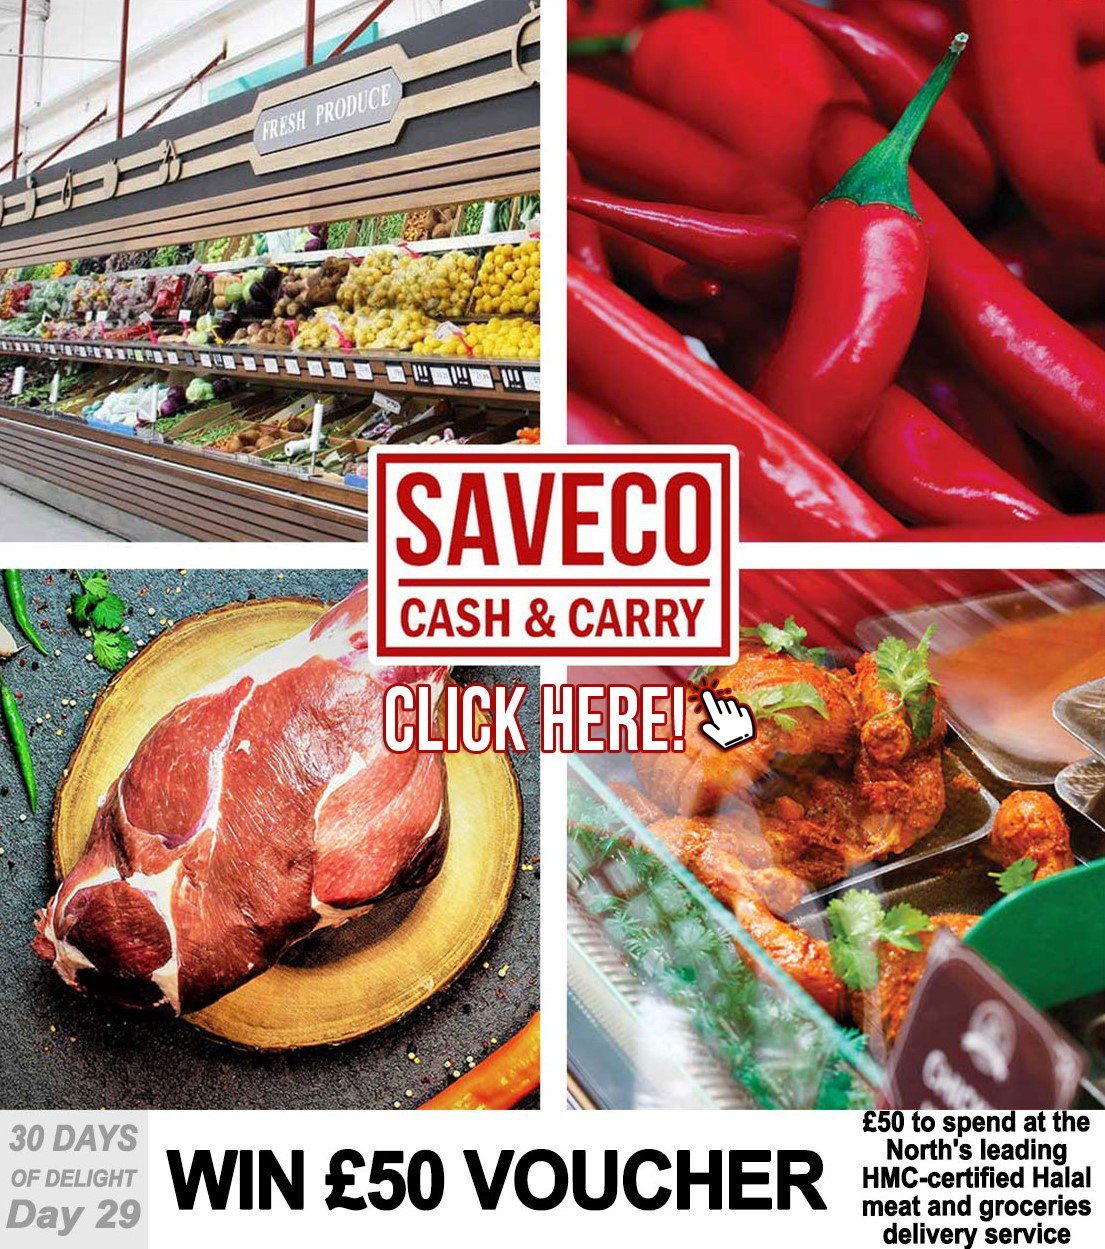 Feed The Lion competition - win £50 to spend at SaveCo Bradford! SaveCo Online Ltd